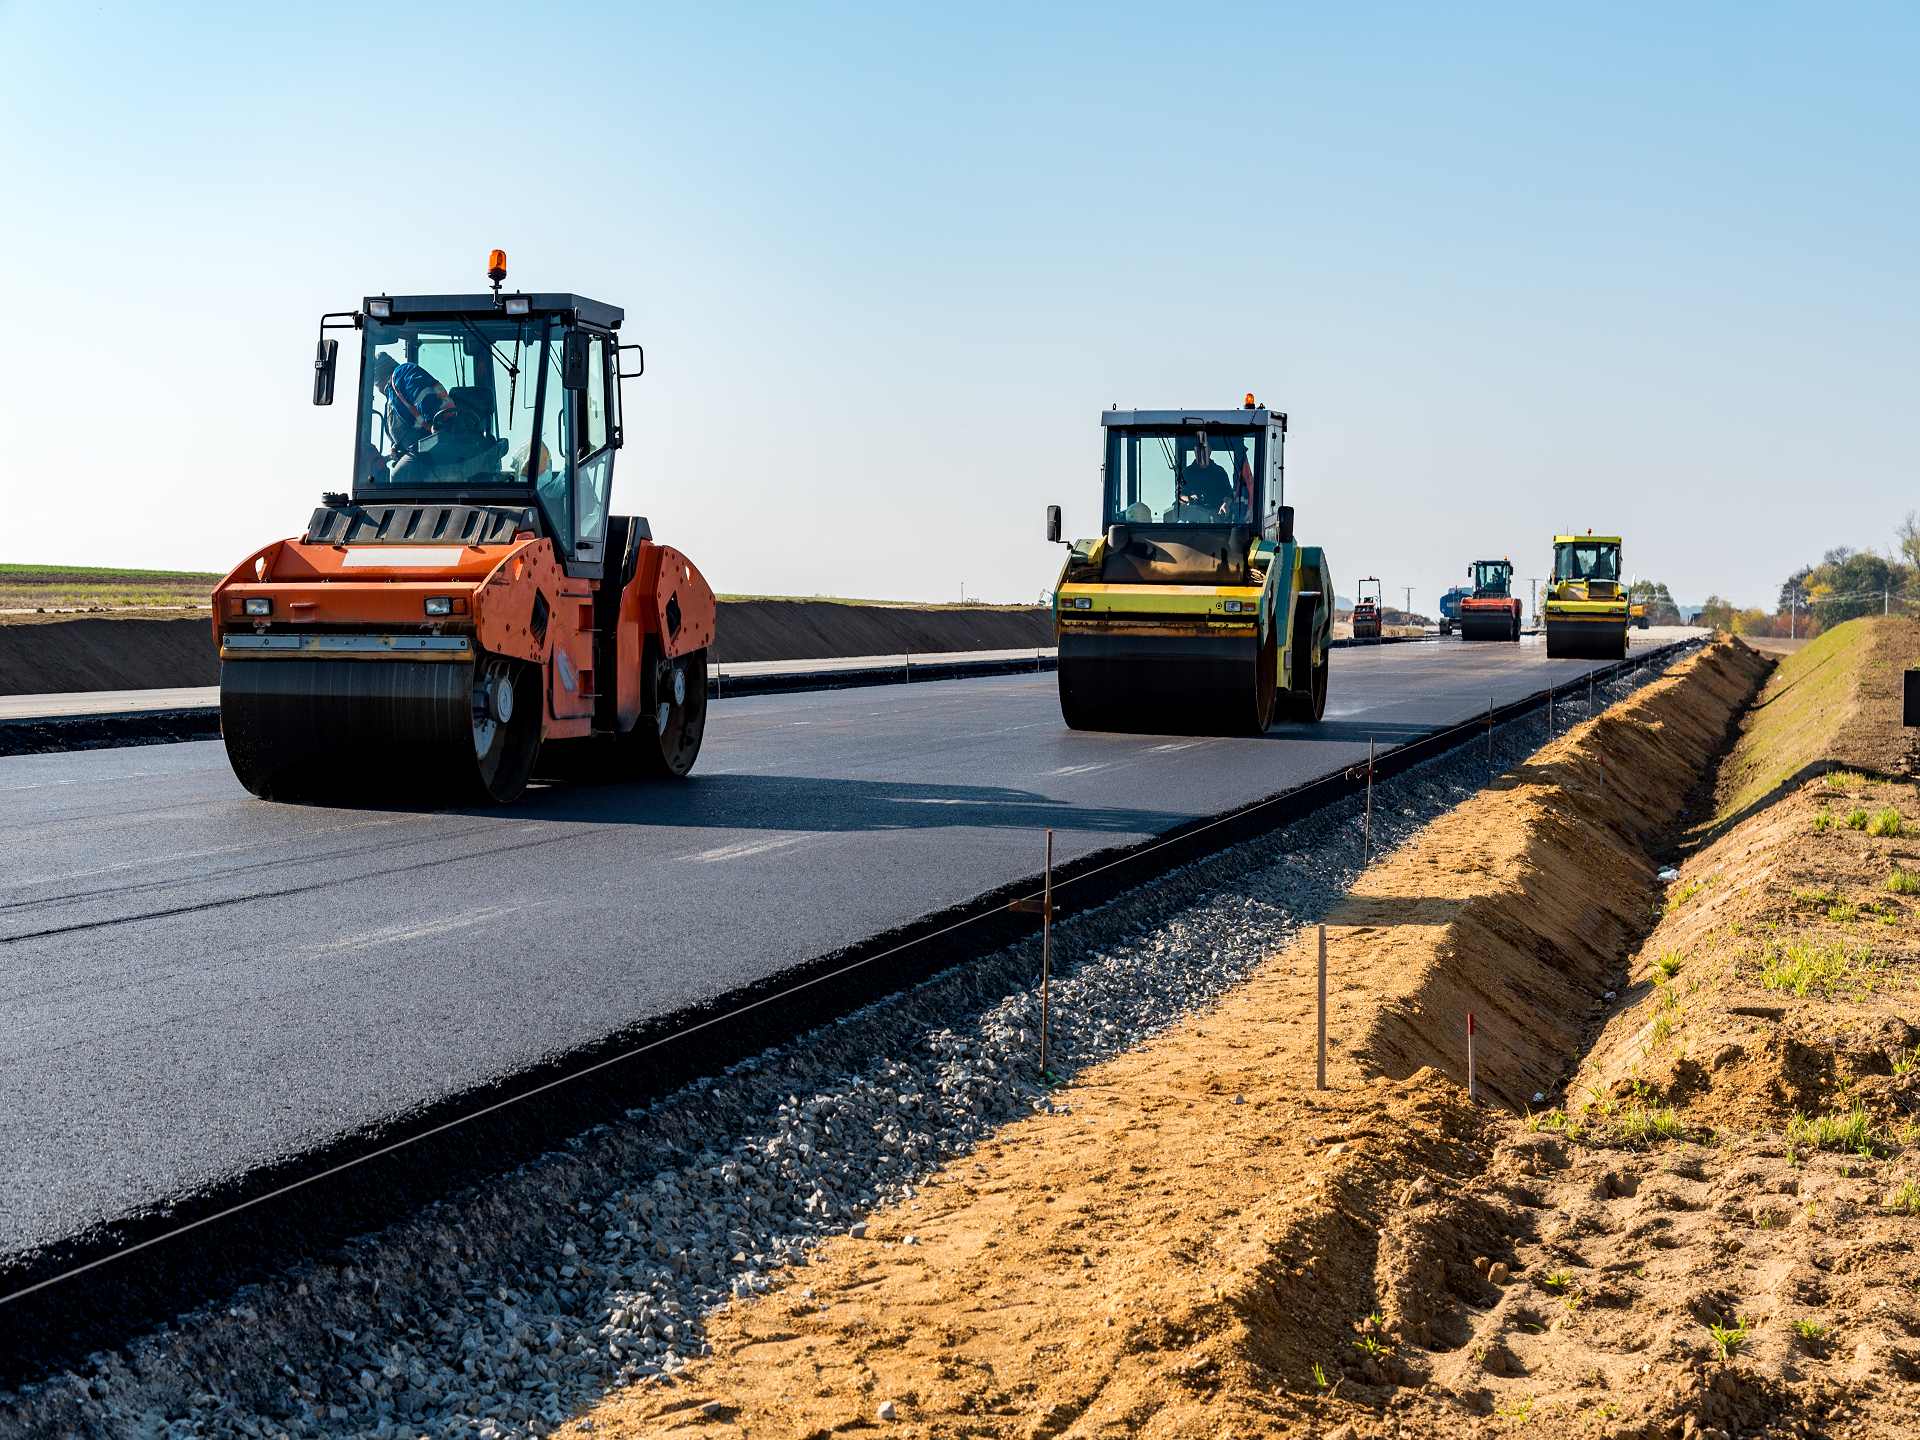 Proven high-quality products for asphalt applications